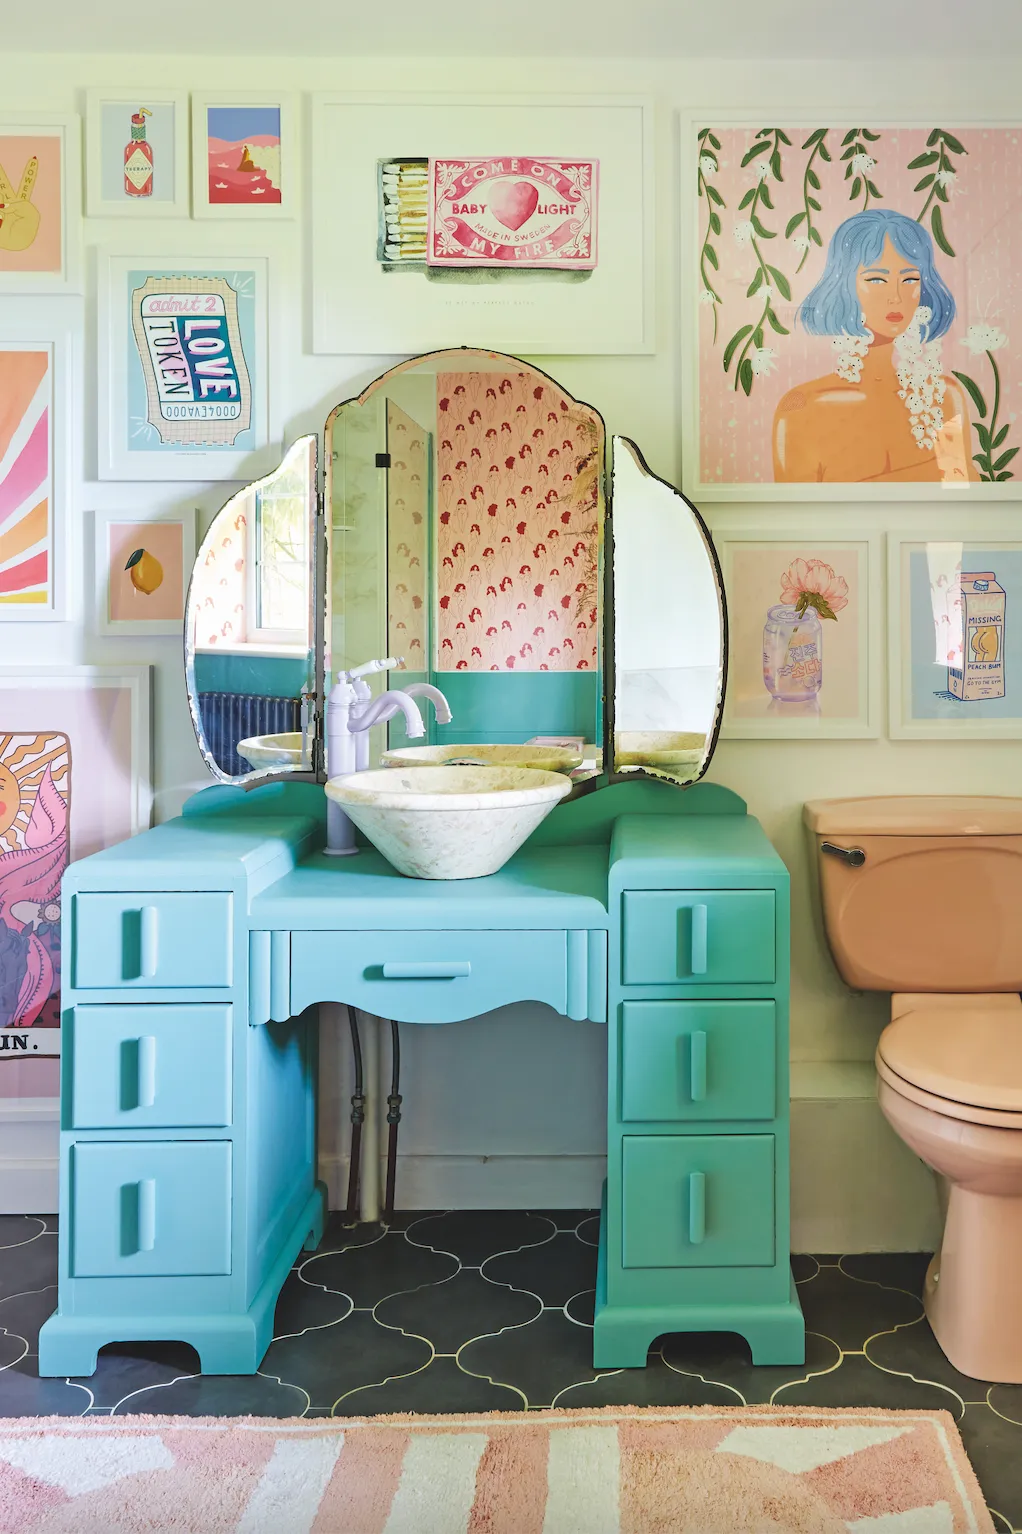 ‘I regularly swap my pictures around to refresh a room,’ says Charlotte. A colourful new gallery wall in the bathroom is currently making her smile